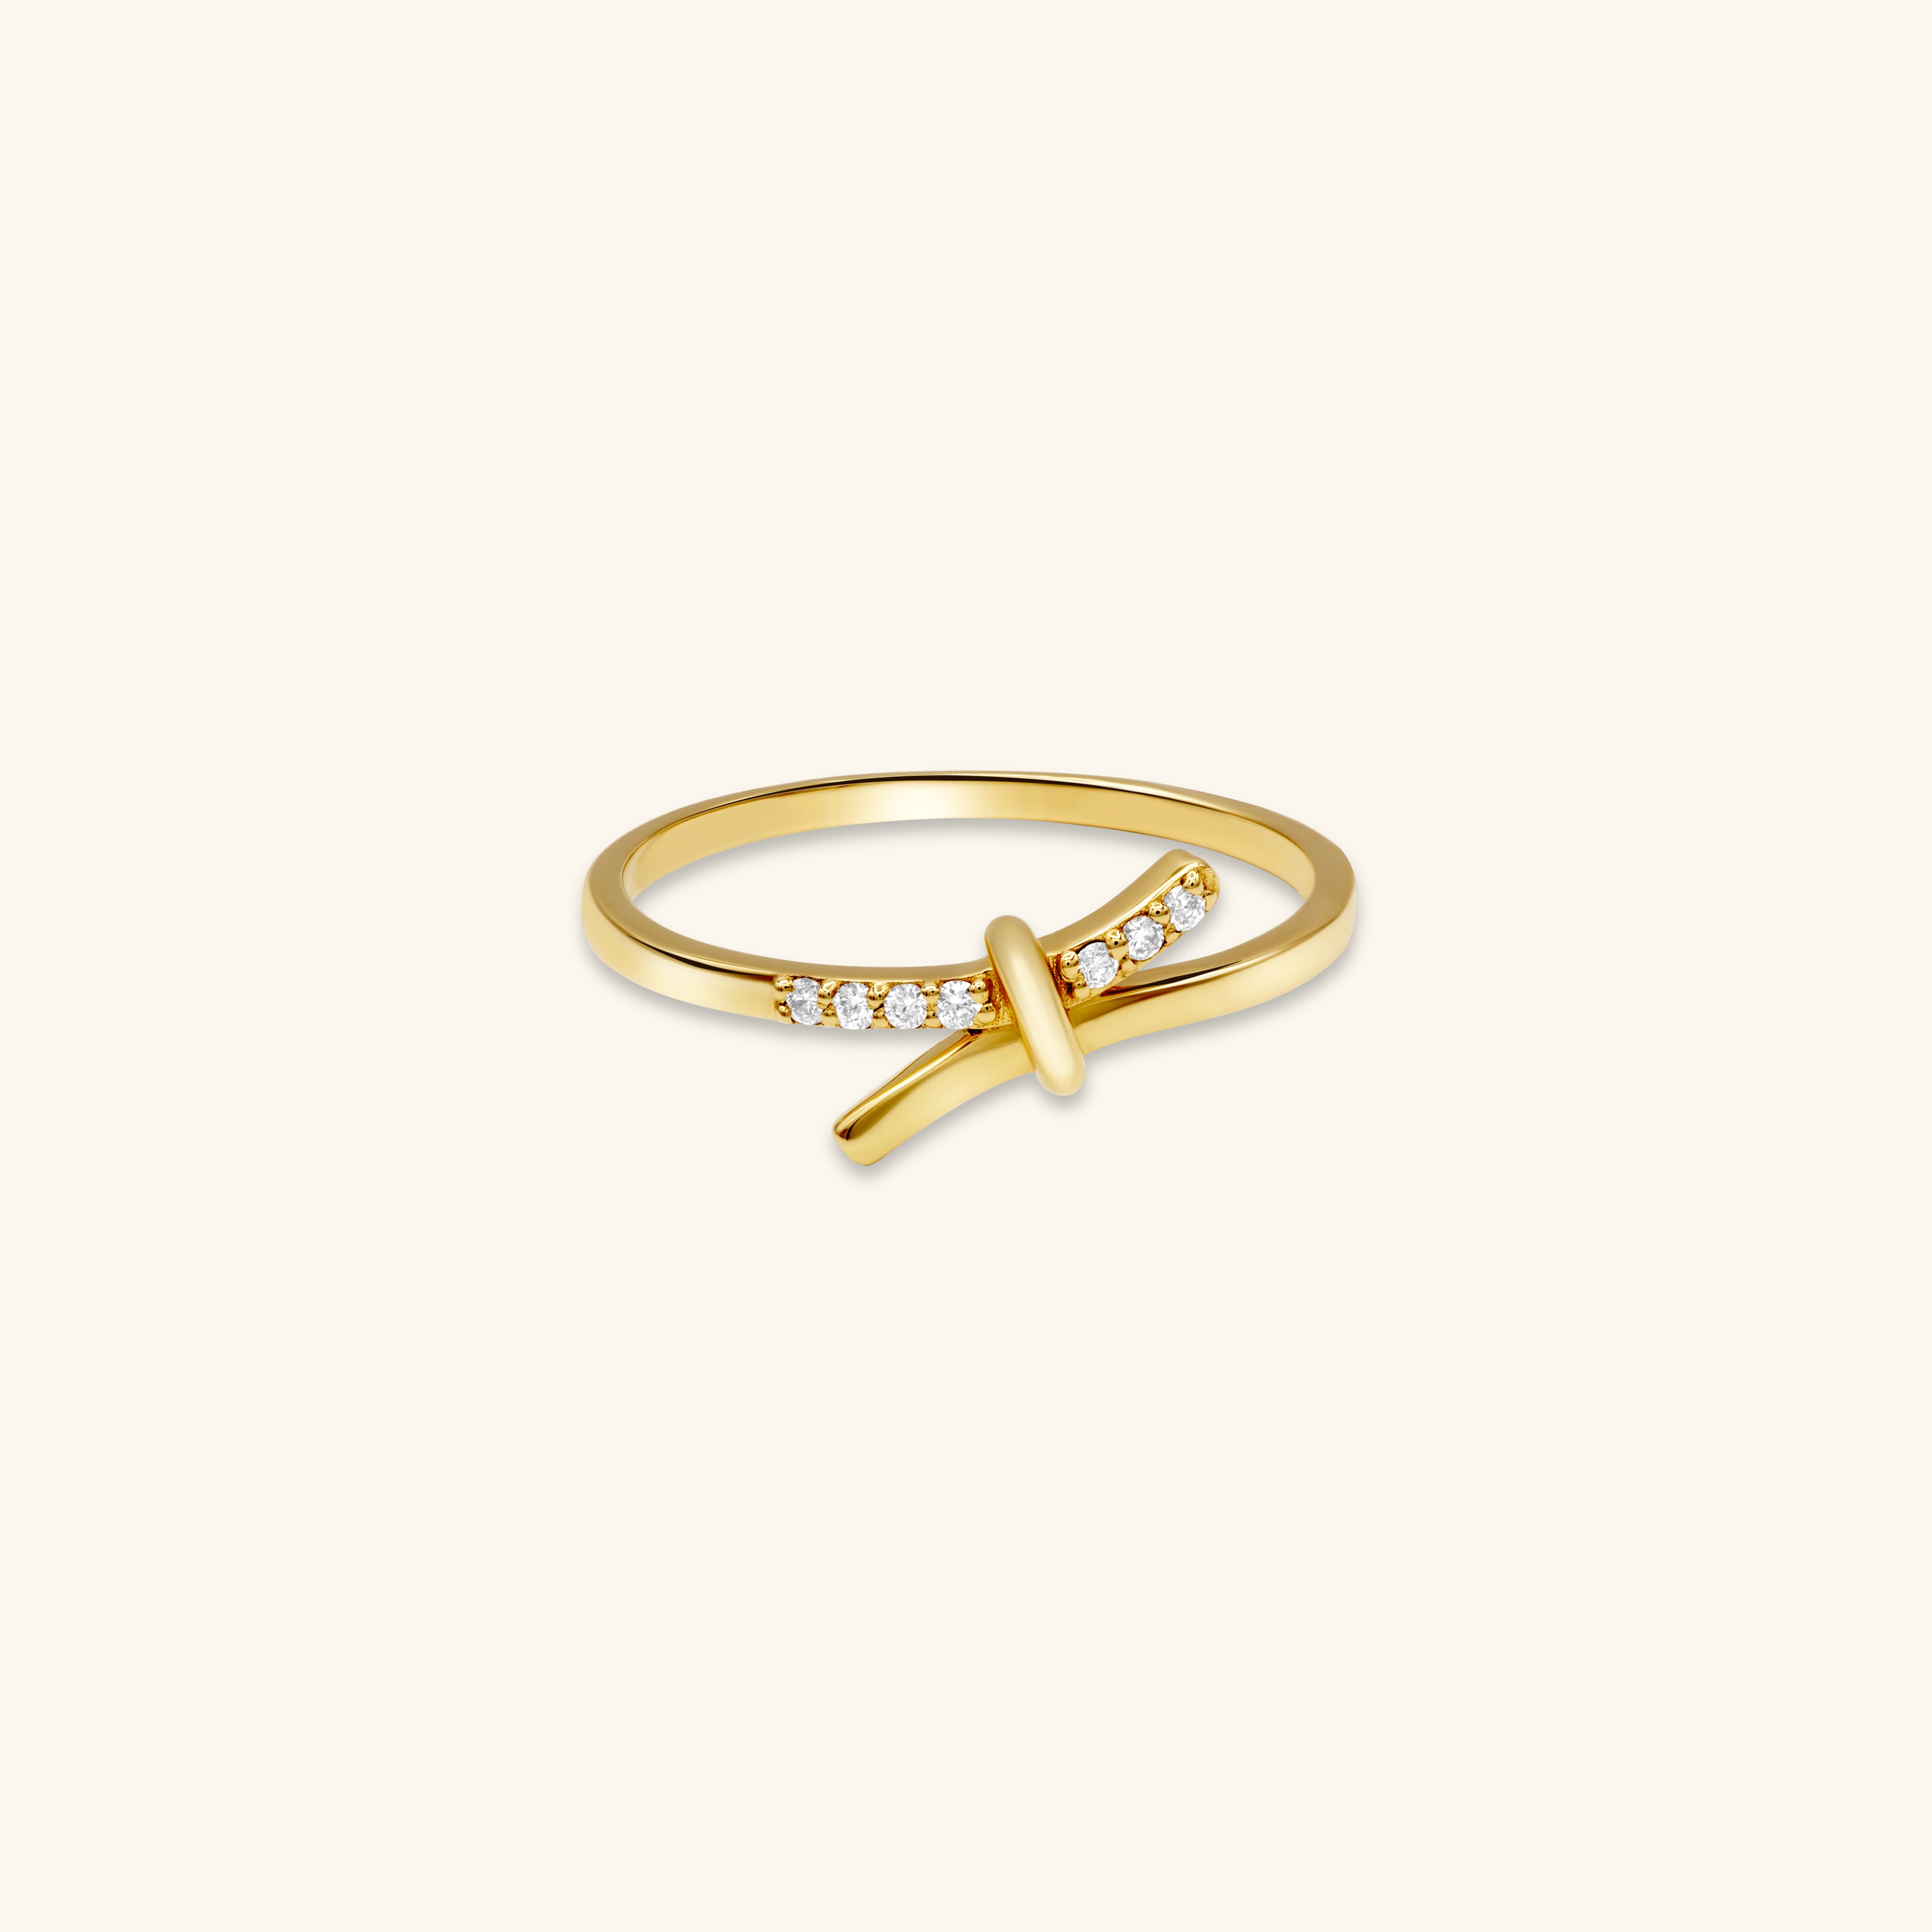 Gold By Manna | Fine Jewelry for Everyday Wear